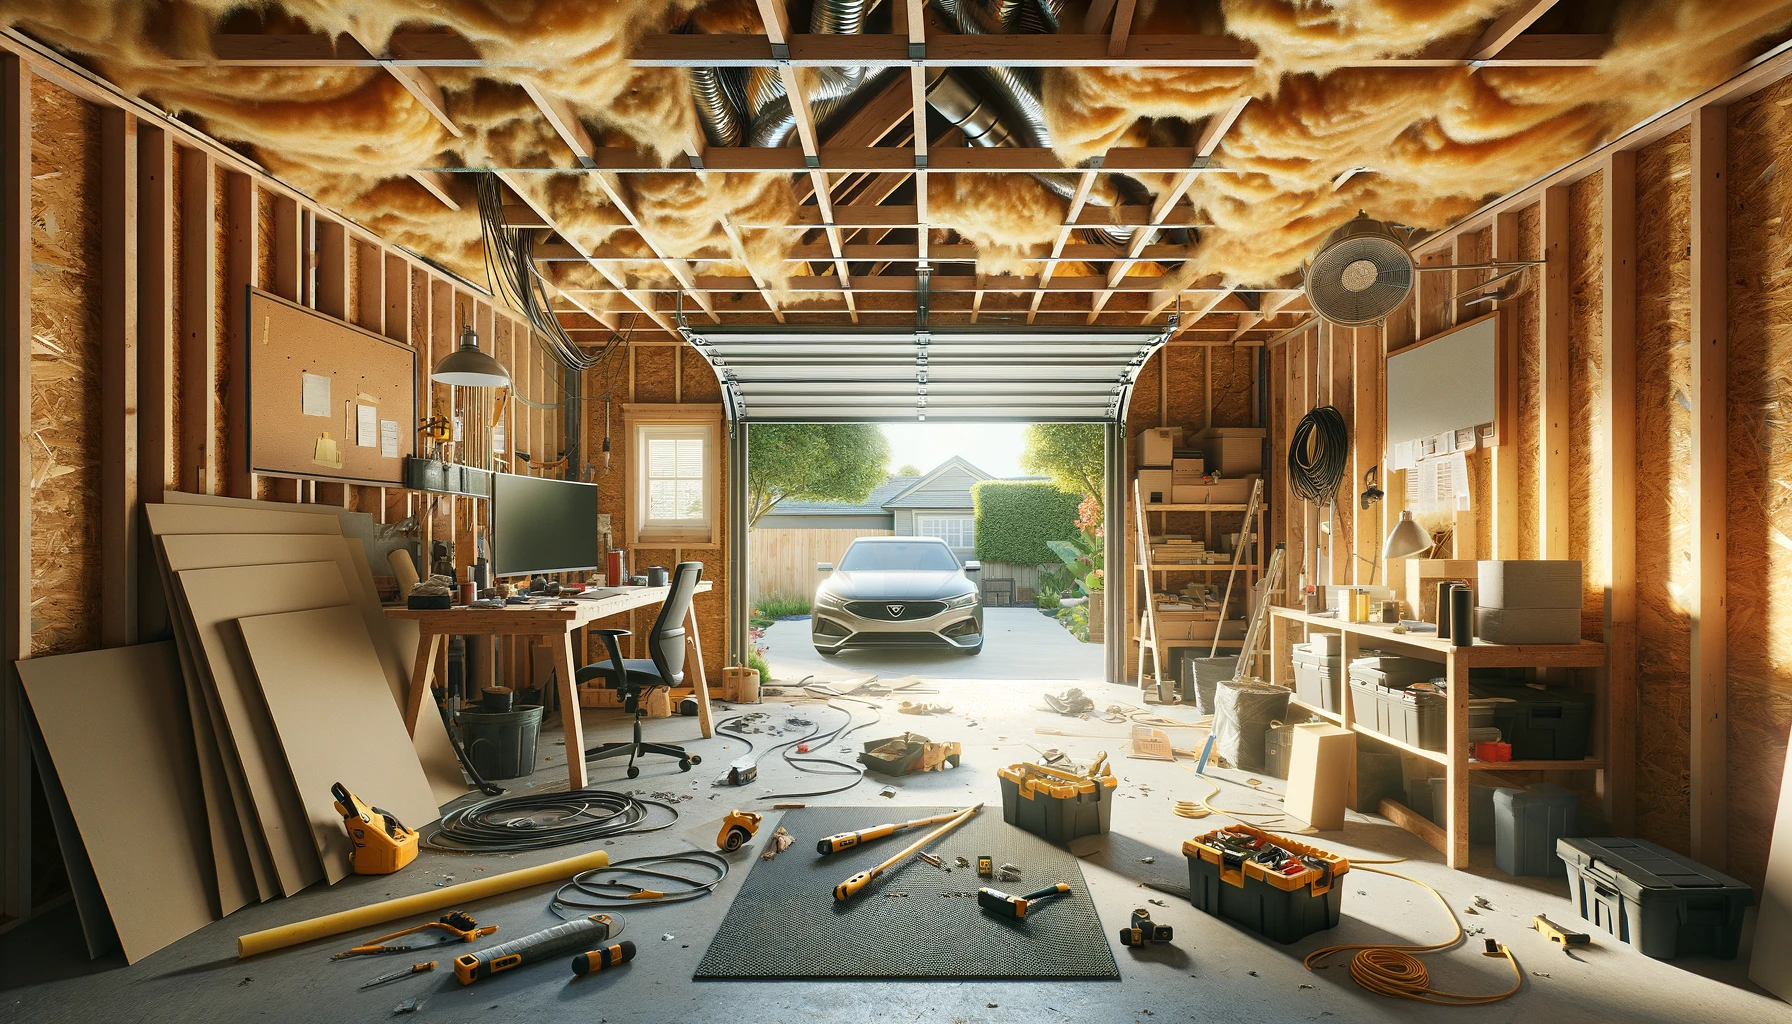 Messy home garage workshop with open door and car outside.